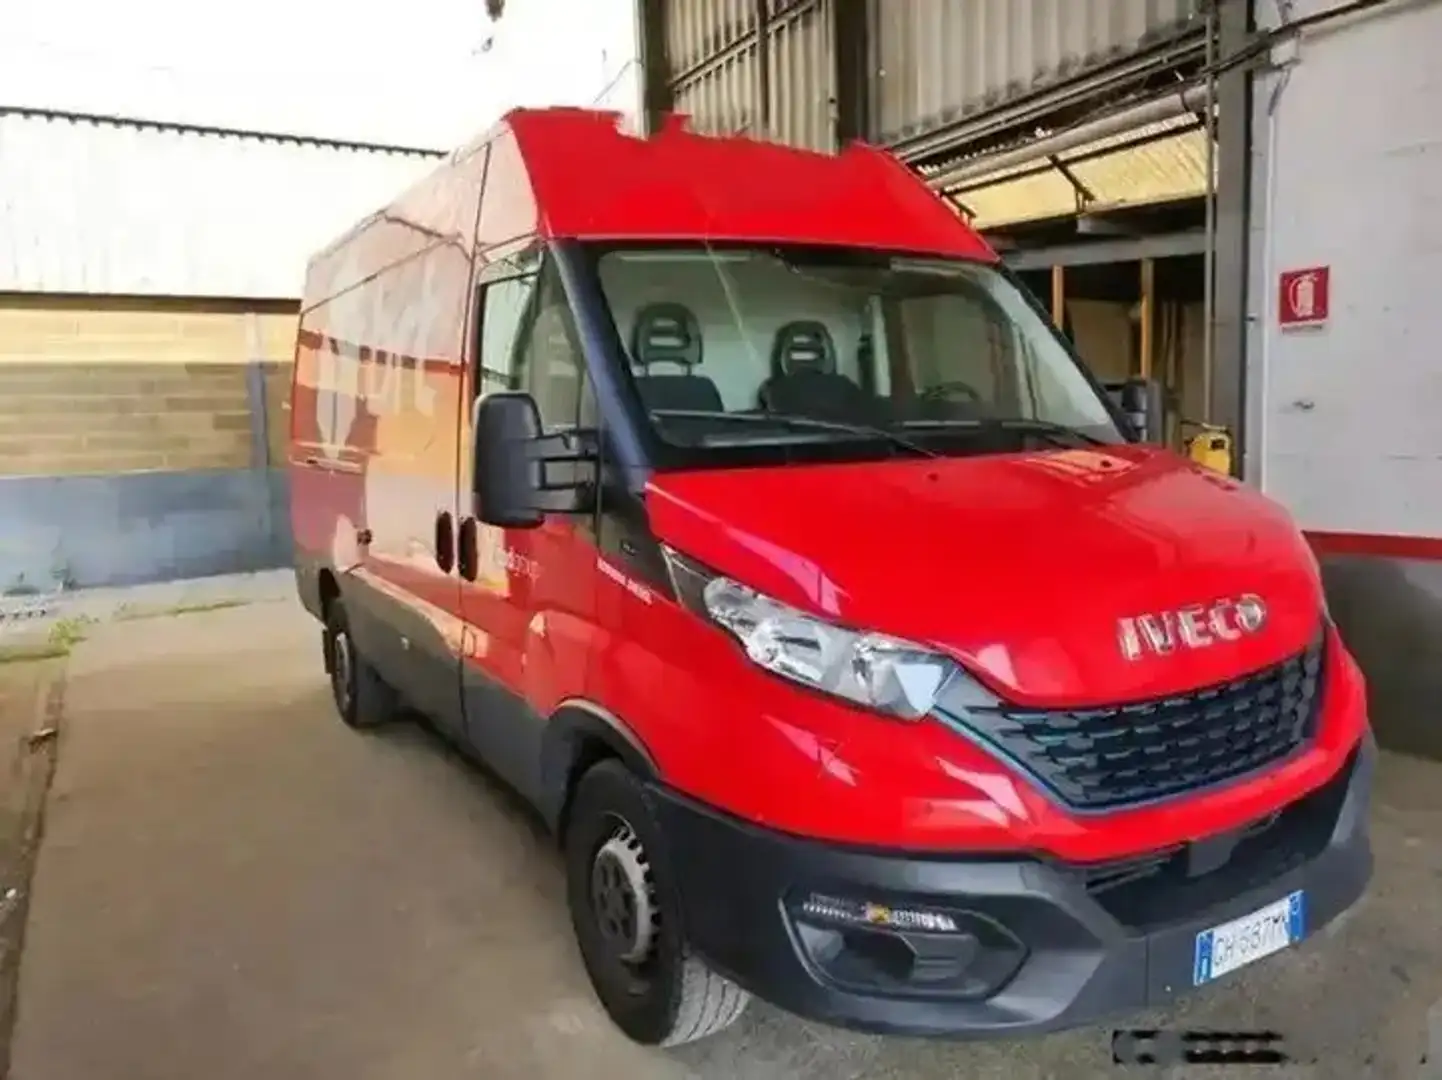 Iveco Daily 35S14NV 3.0 NATURAL POWER PM-SL-TM  TG : GH687MN Rot - 2